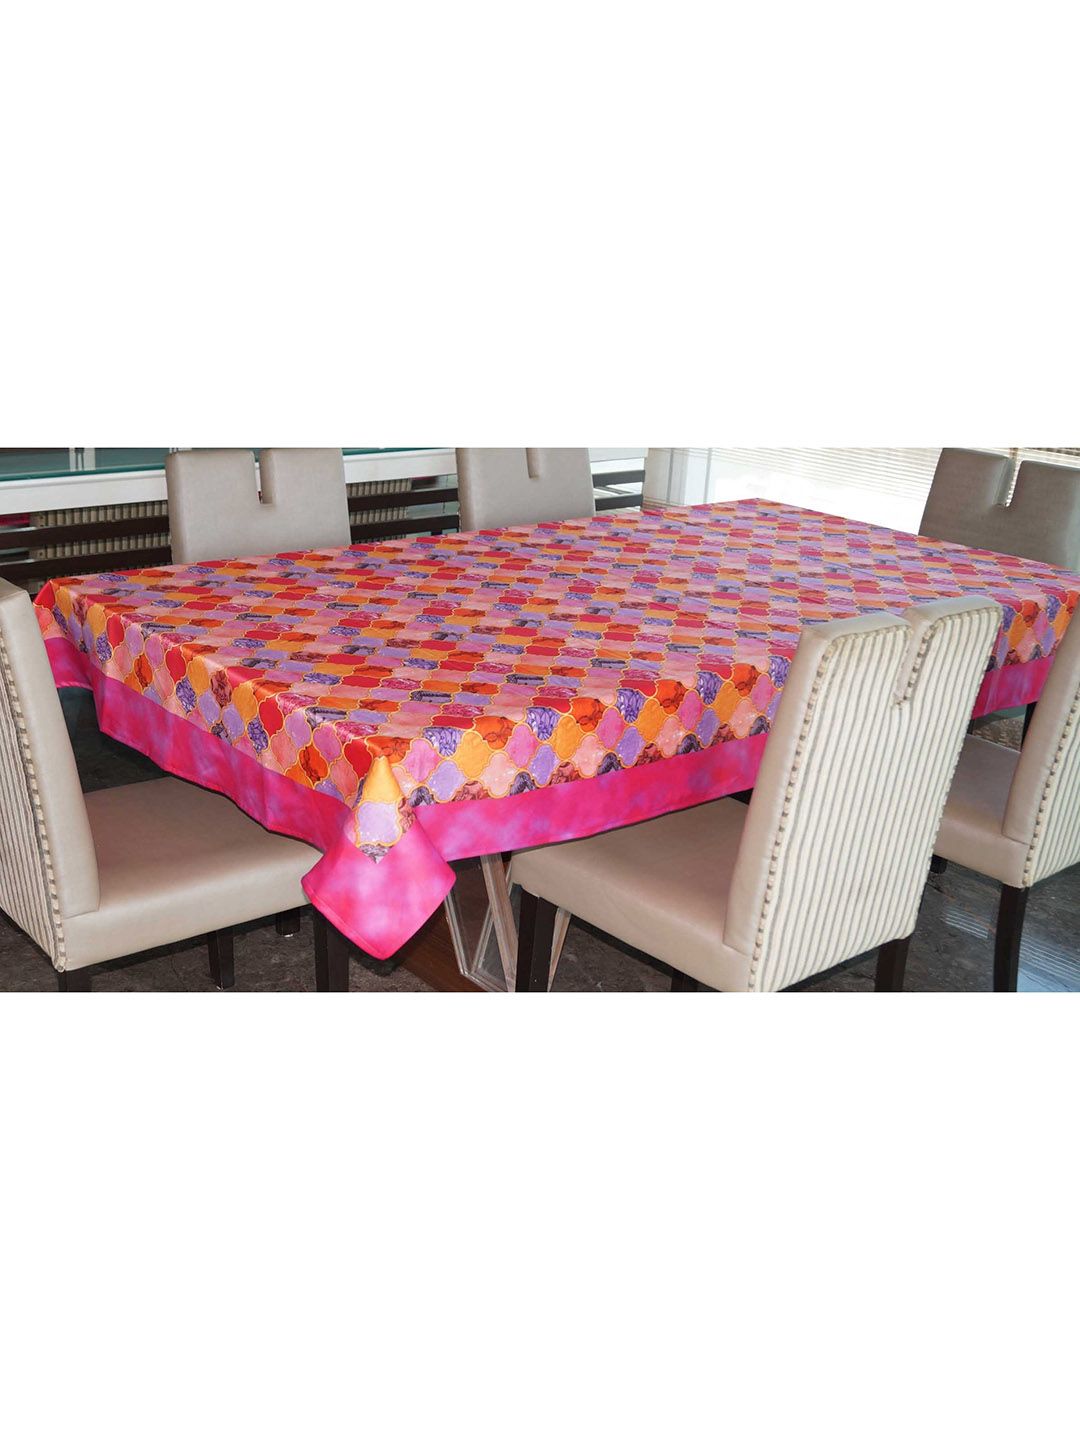 Lushomes Pink & Orange Printed Jacquard 6-Seater Table Cover Price in India